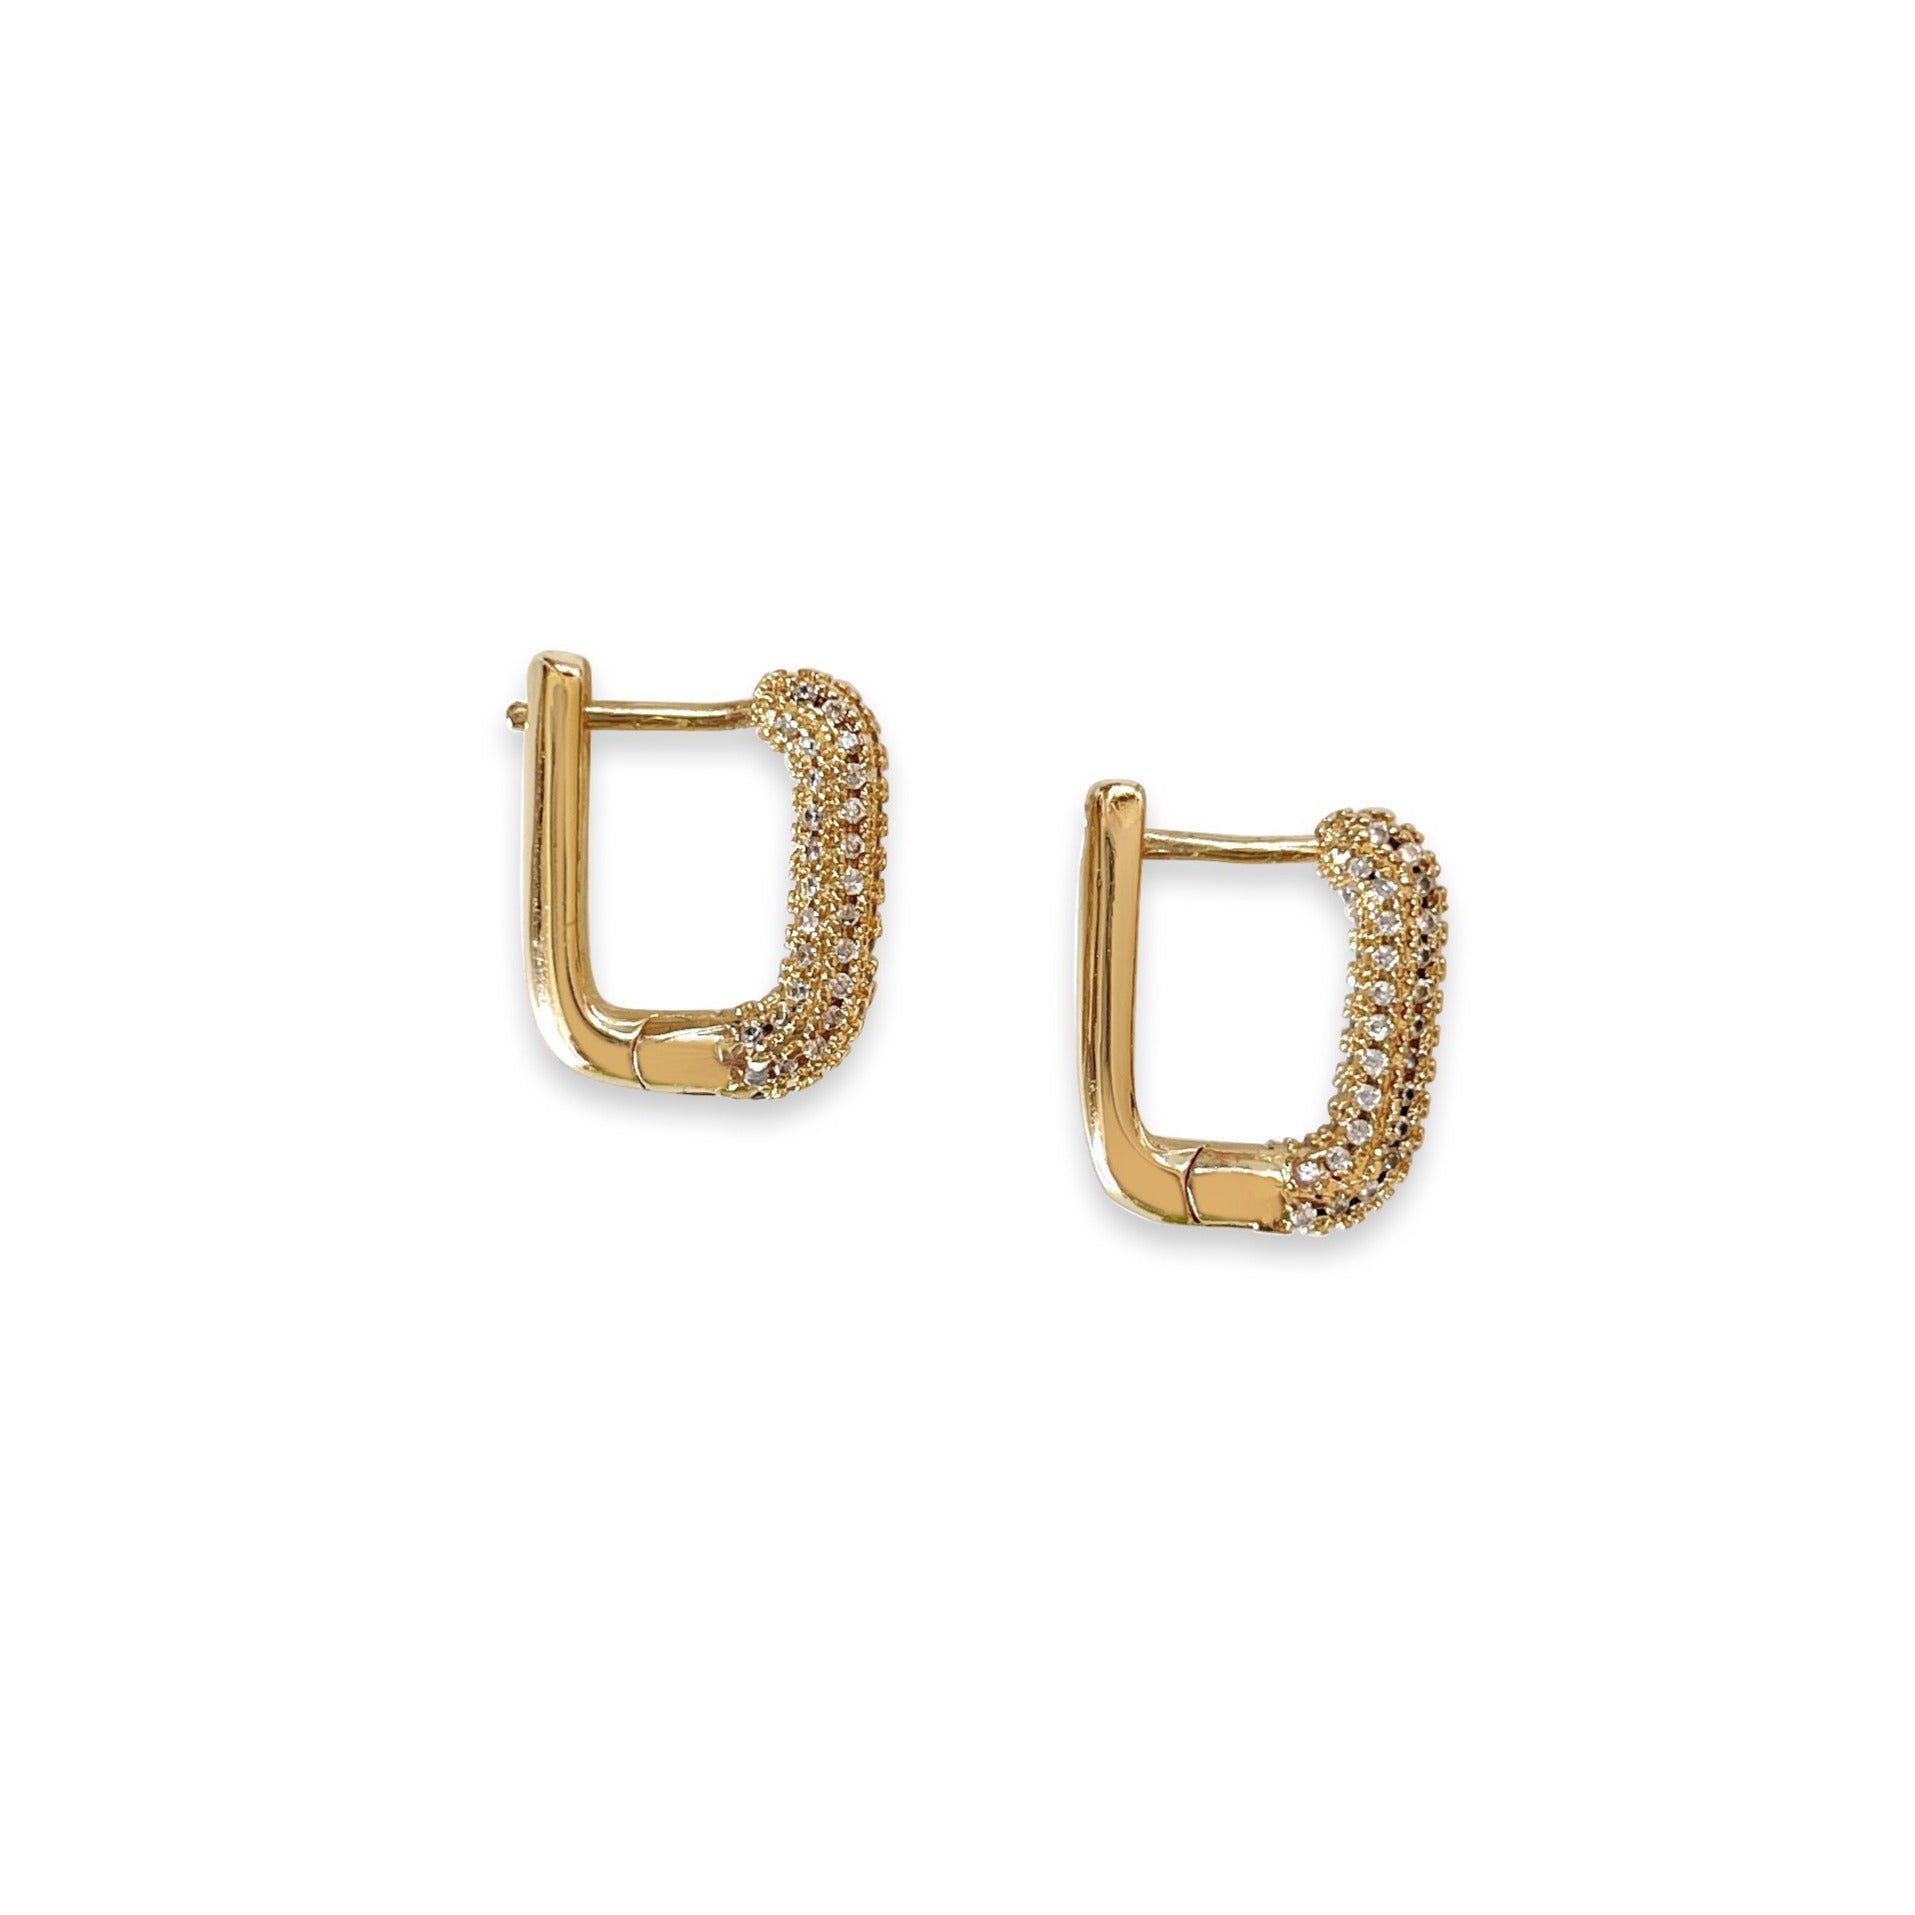 Divine Hoops Earrings - Gold from Erin Fader Jewelry